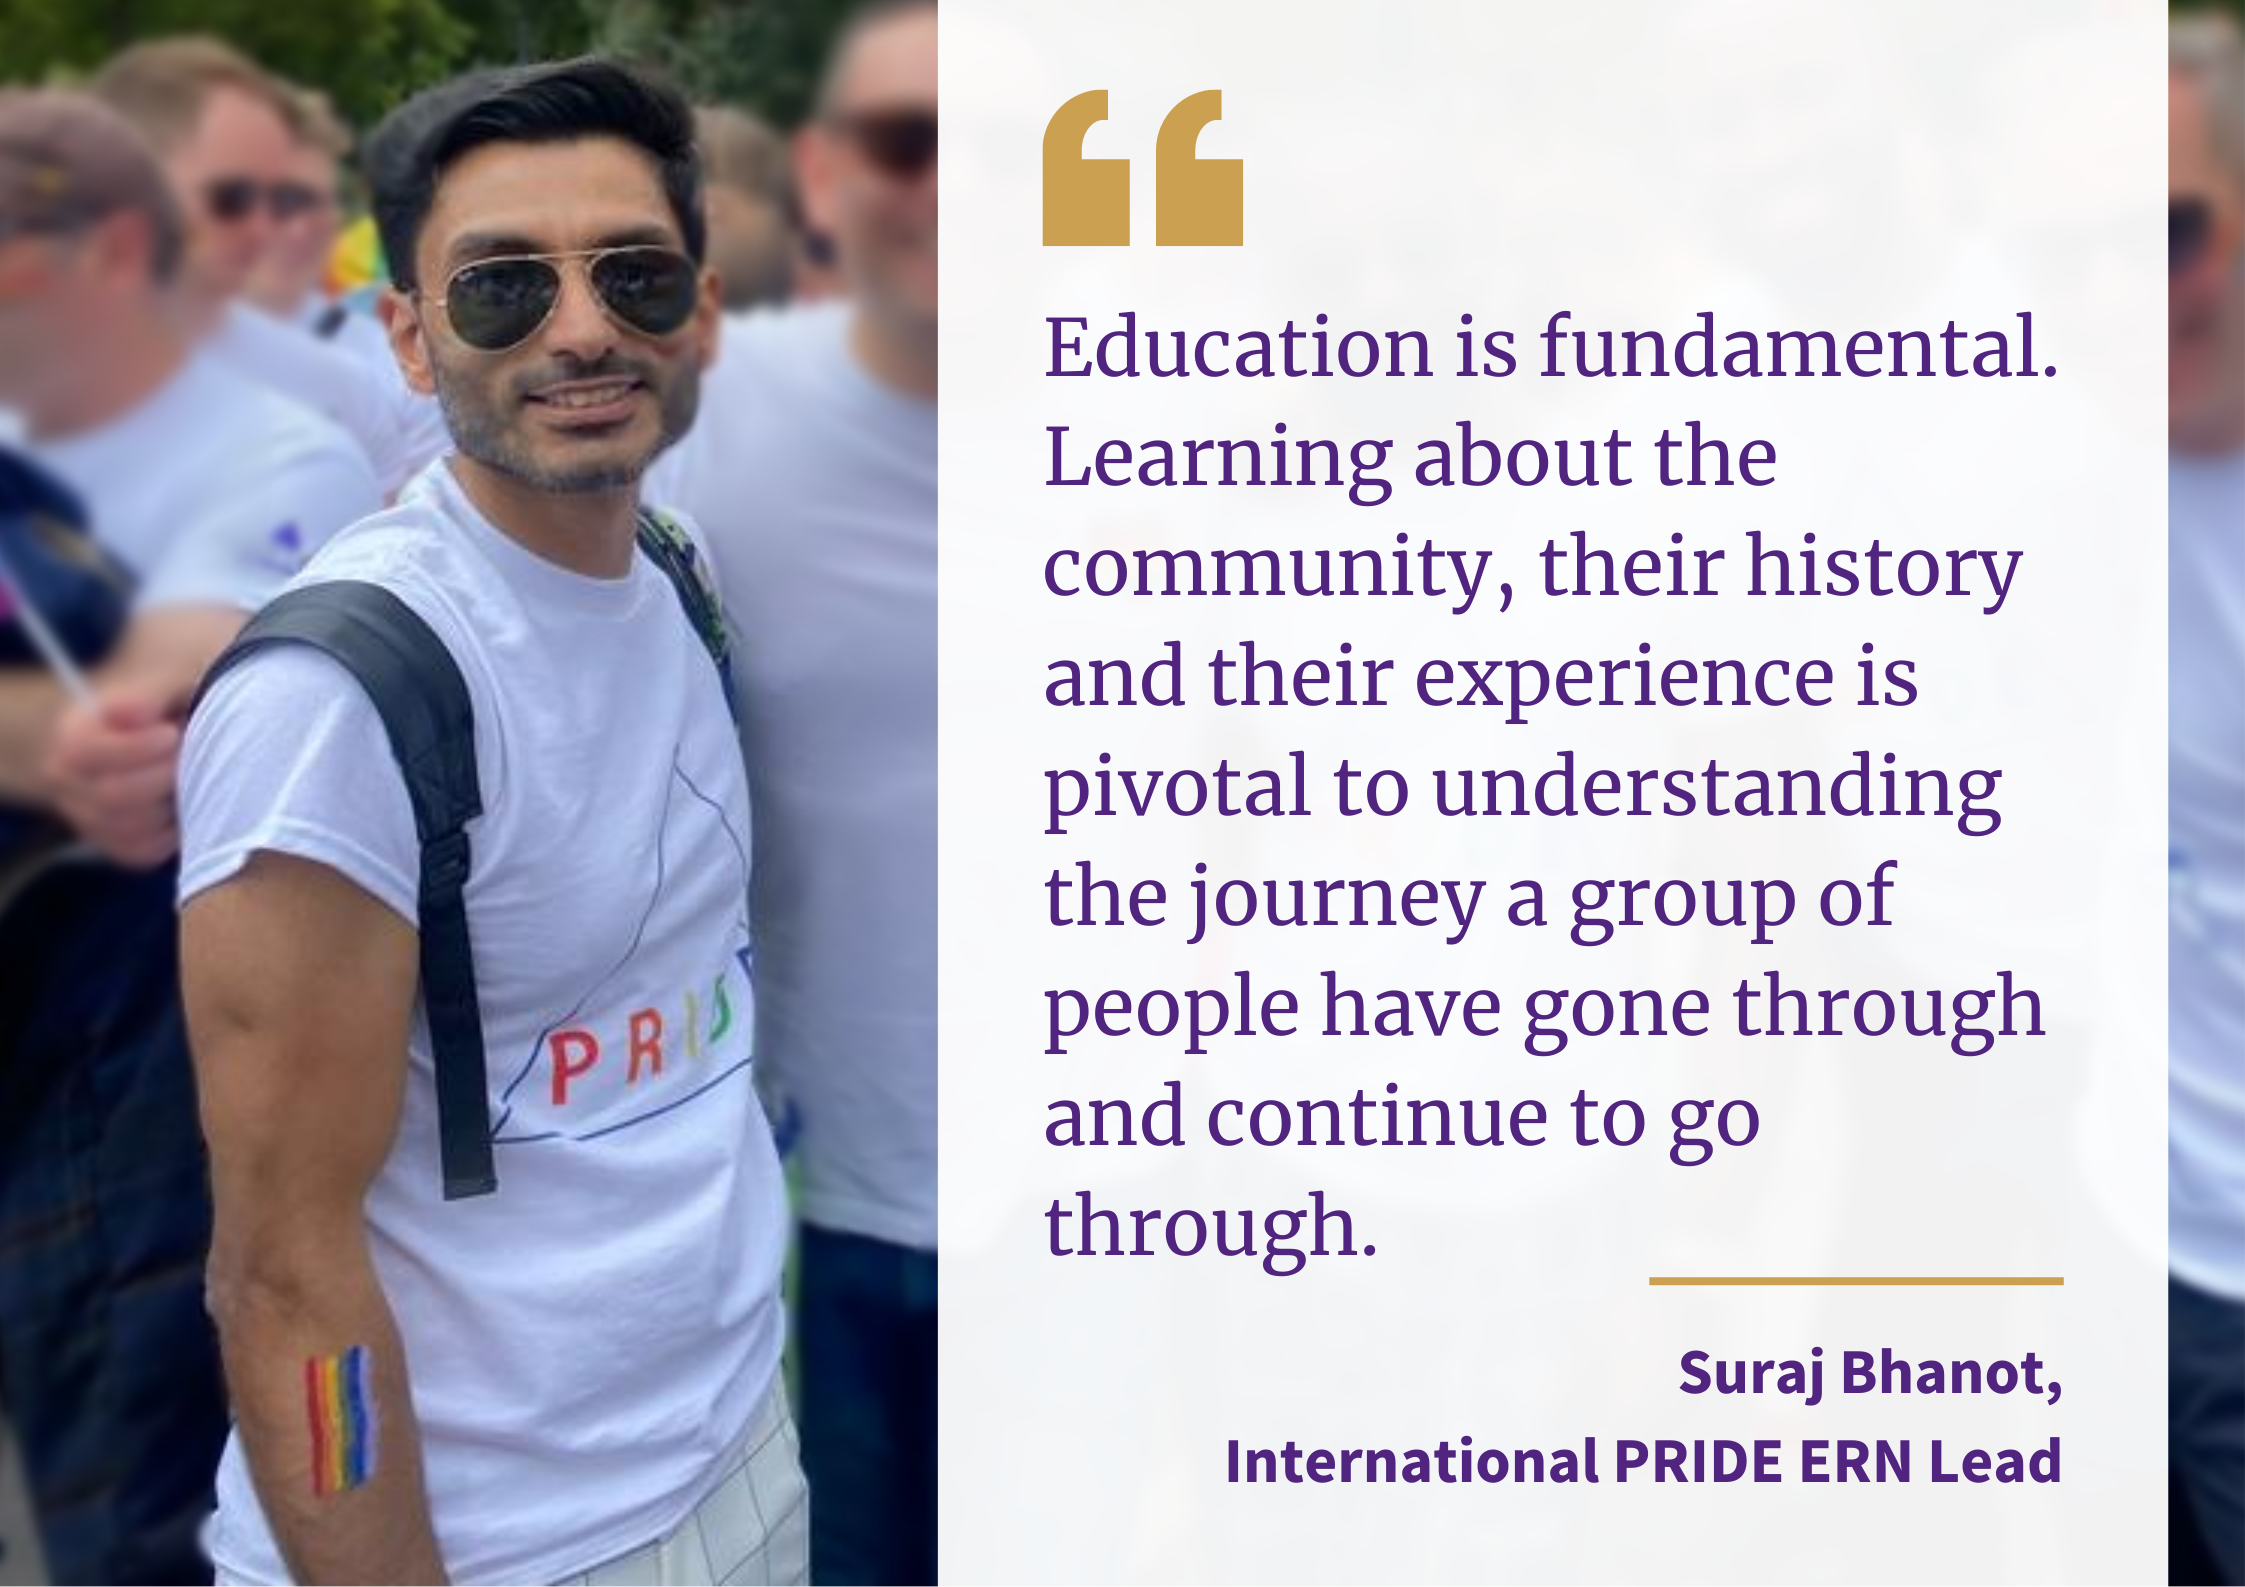 An image of Suraj Bhanot with a quote that says "Education is fundamental. Learning about the community, their history and their experience is pivotal to understanding the journey a group of people have gone through and continue to go through."